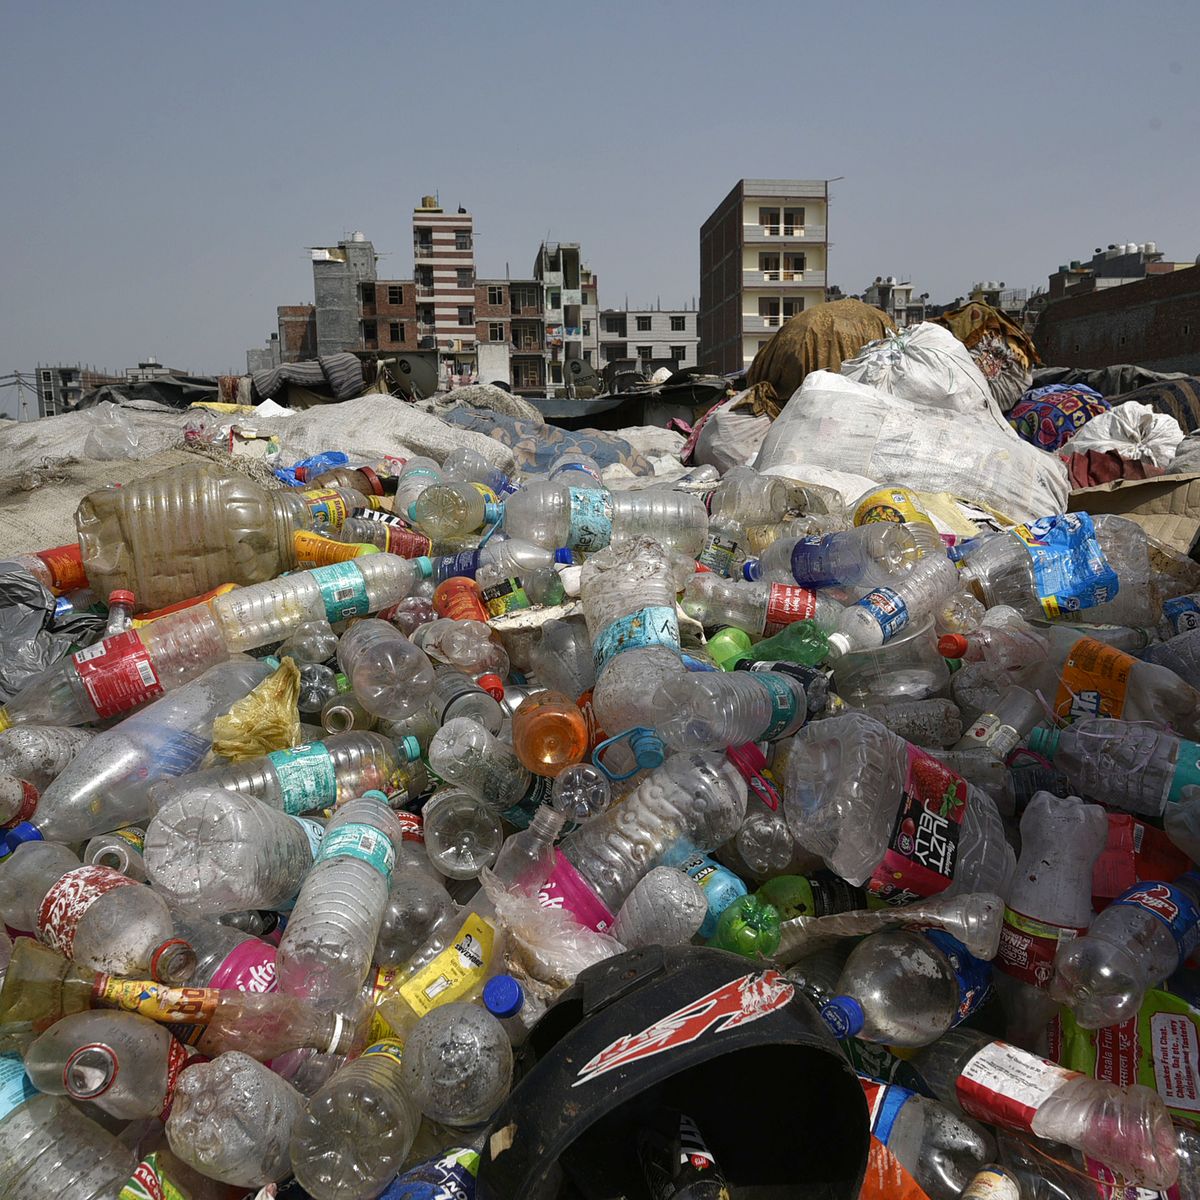 https://hips.hearstapps.com/hmg-prod/images/plastic-bottles-and-containers-are-seen-at-a-garbage-dump-news-photo-1148072242-1567621380.jpg?crop=0.66757xw:1xh;center,top&resize=1200:*